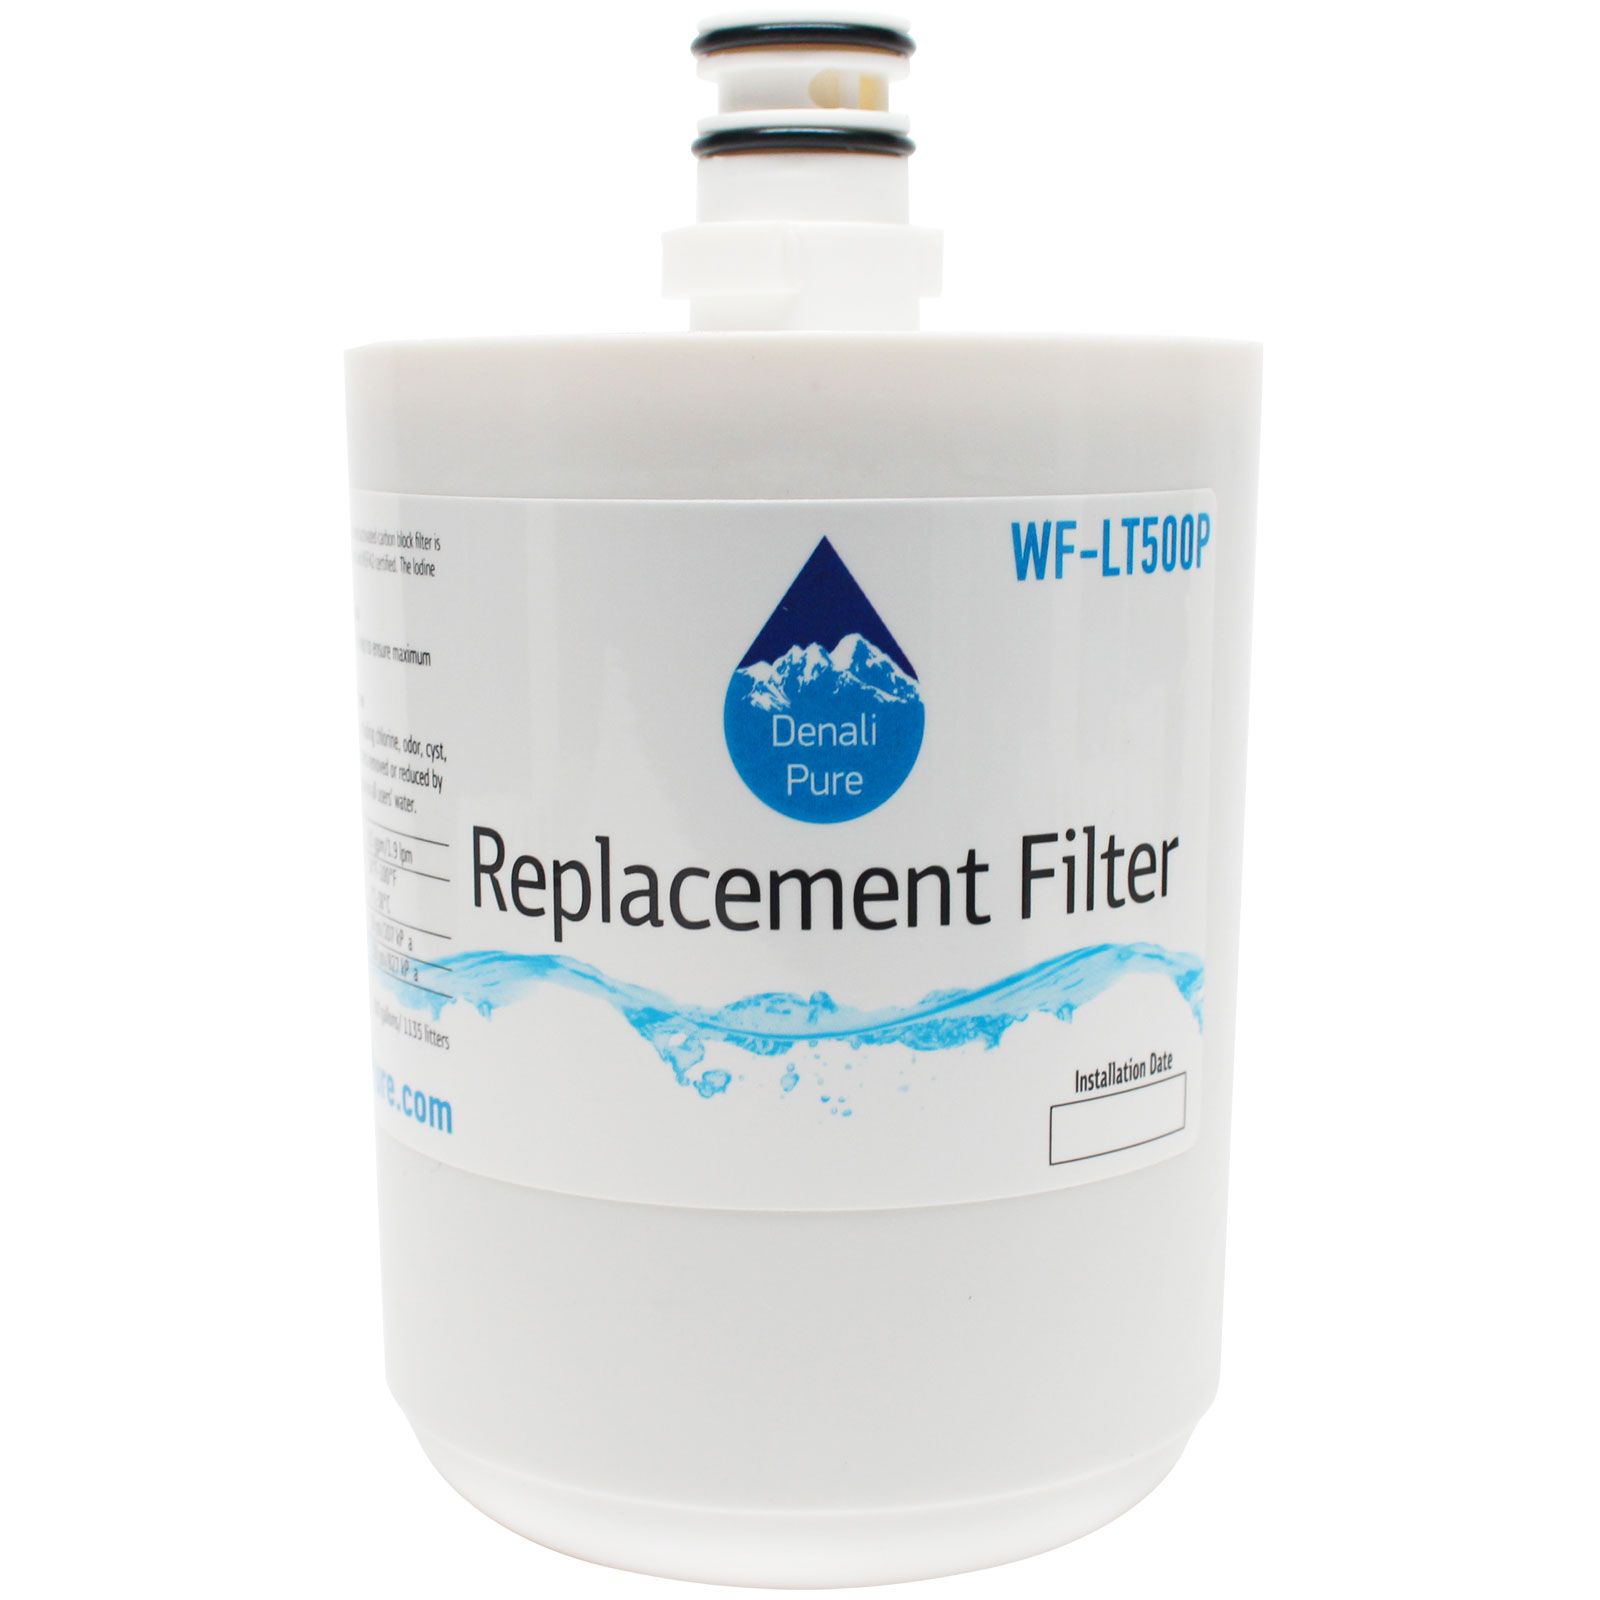 UpStart Components Replacement Sears/Kenmore 79551326011 Fridge Water Filter-For Sears/Kenmore ADQ72910902 GEN11042FR-08 46-9890 Water Filter